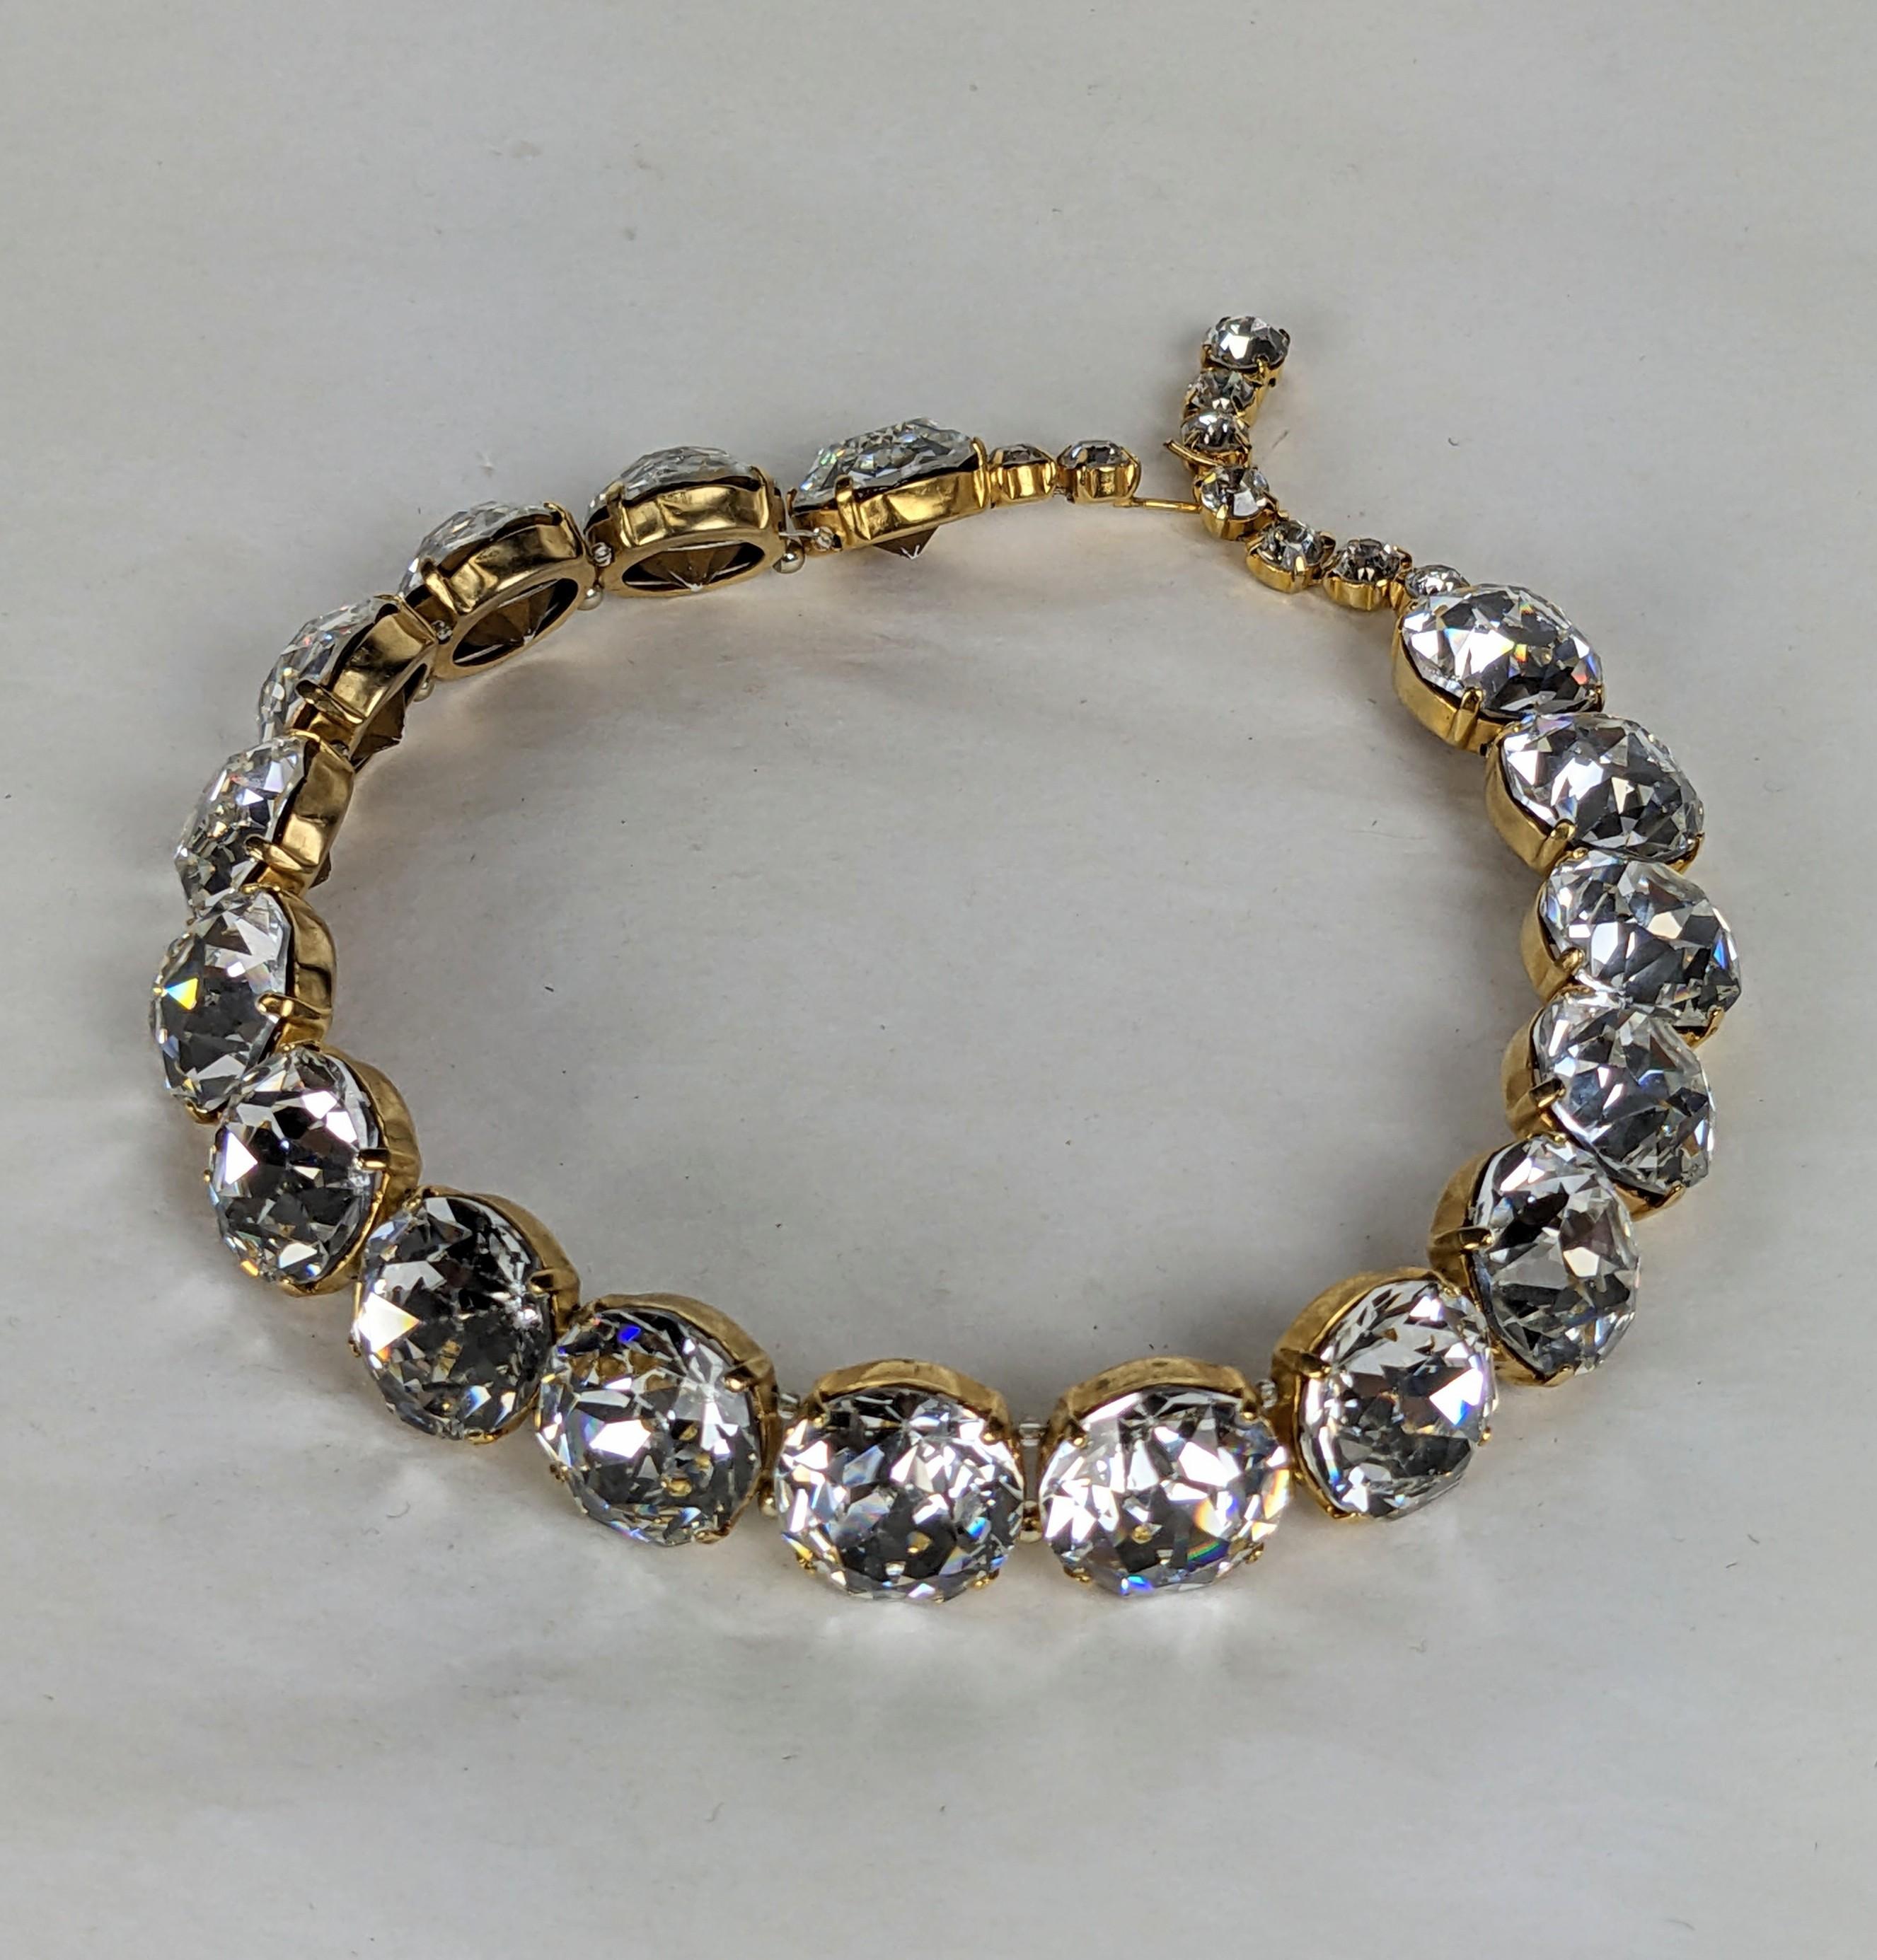 Mid Century Crystal Headlight Choker Necklace from the 1950's. Huge crystals are wired with bead spacers and set in gold toned metal. Adjustable but sits tight on the neck. Max 14.5